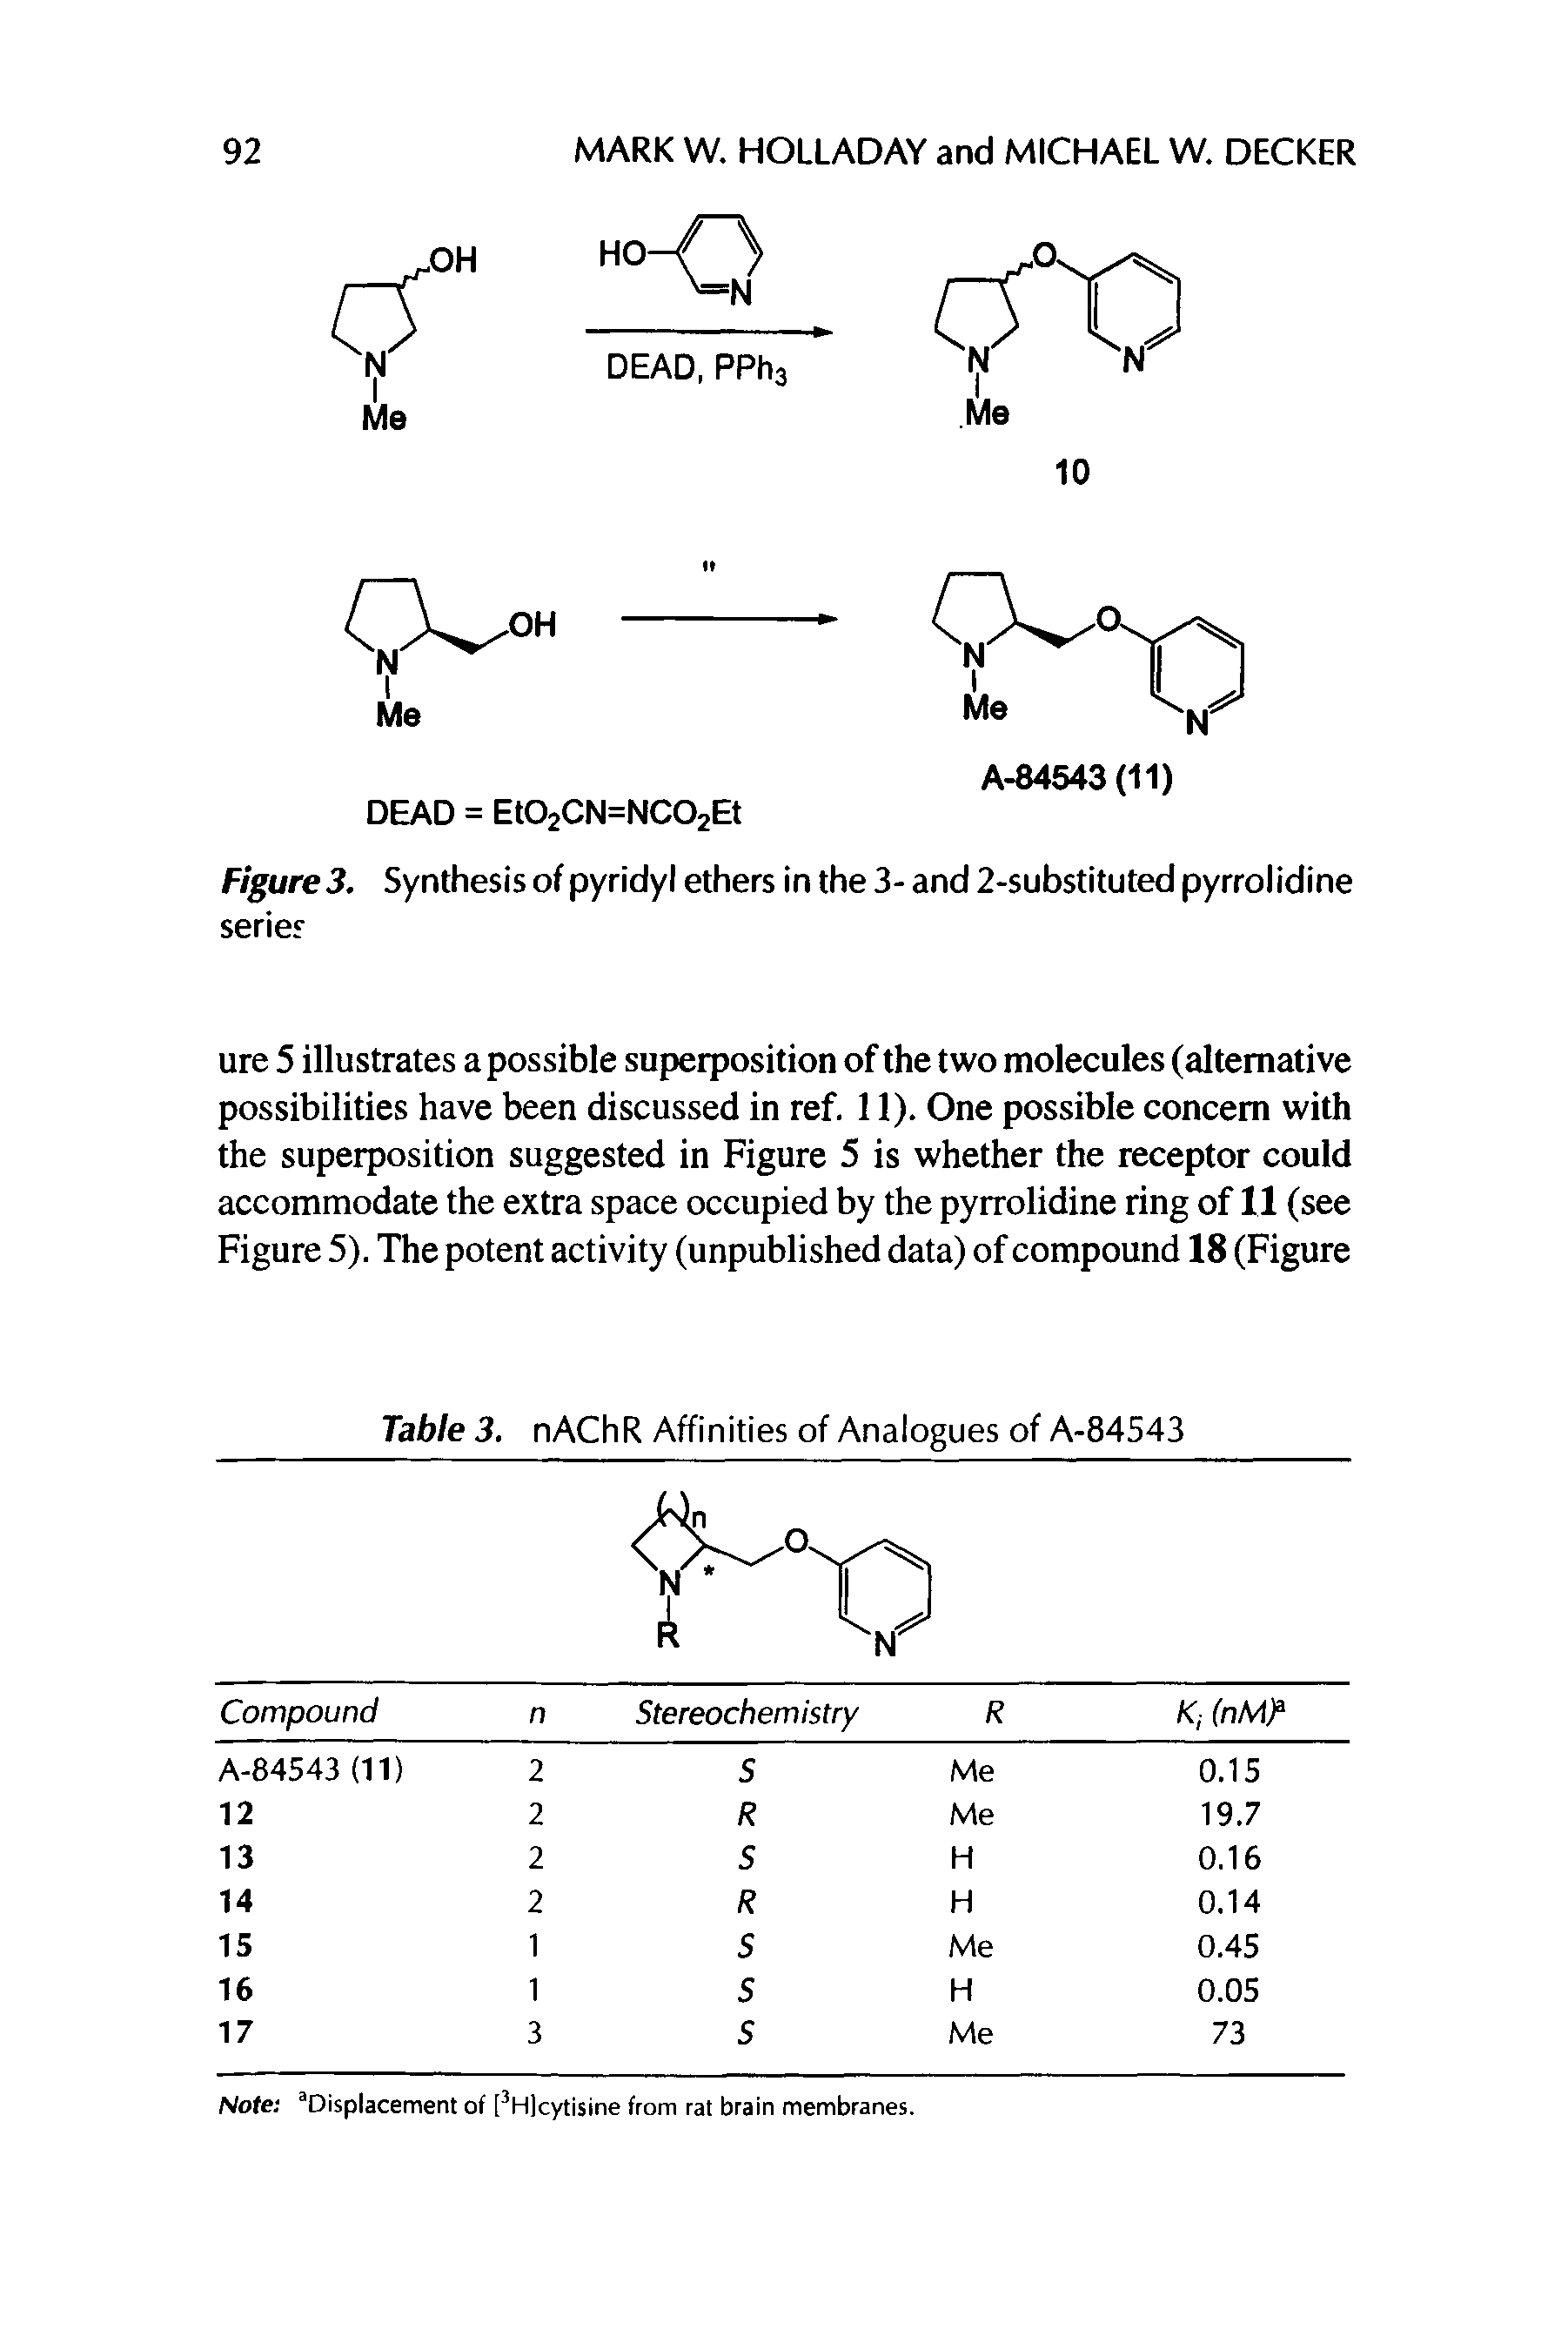 Figure3. Synthesis of pyridyl ethers in the 3- and 2-substituted pyrrolidine series...